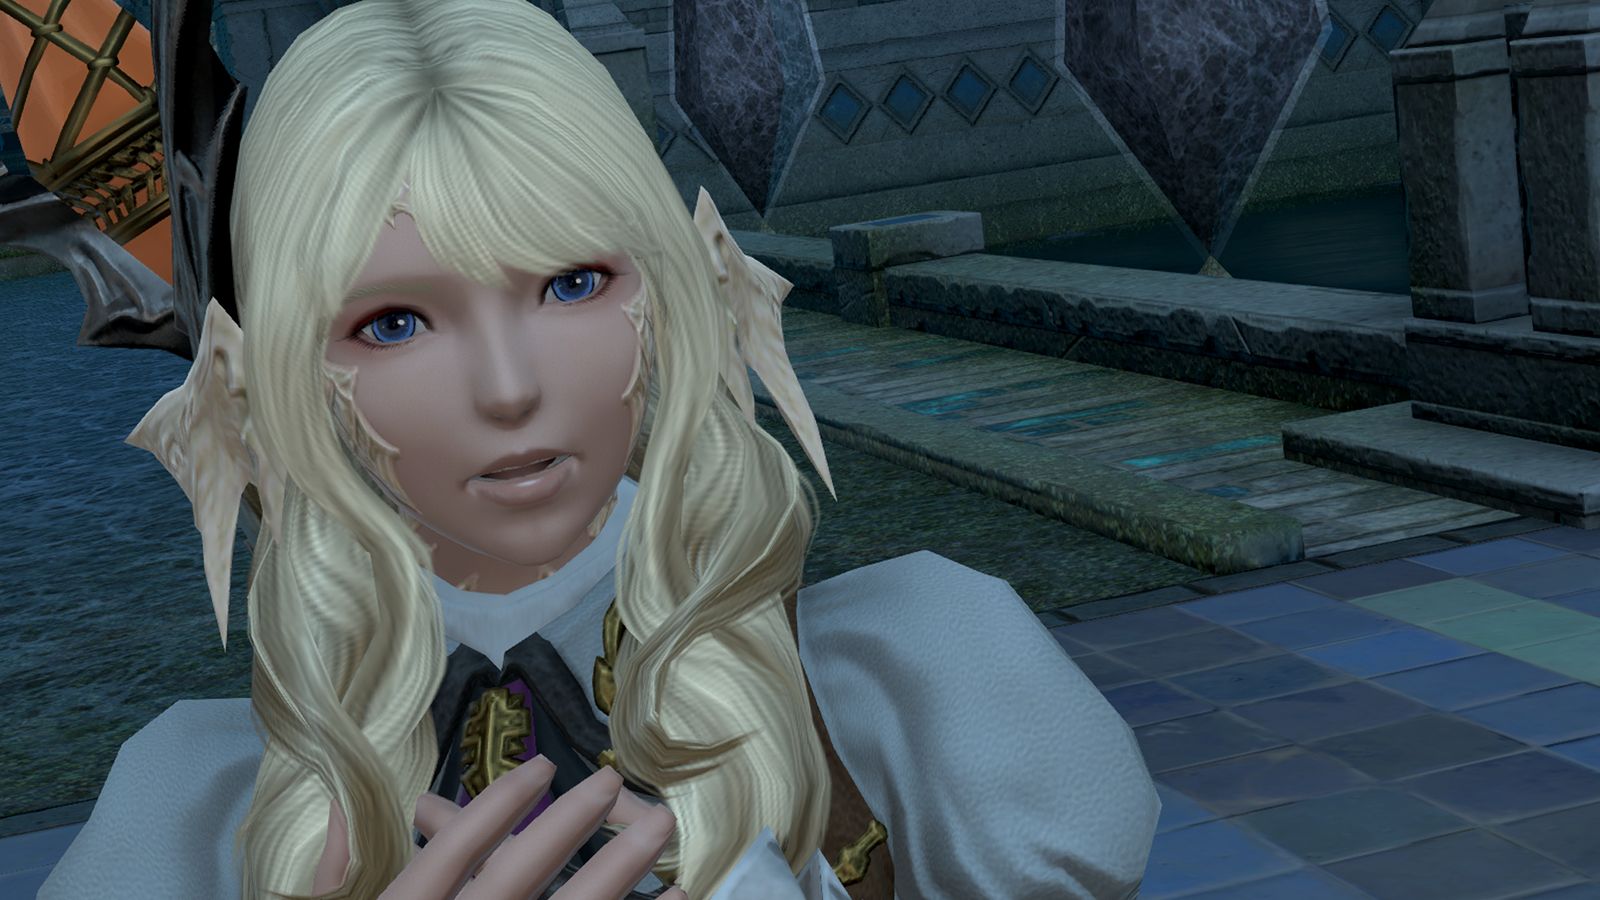 Another image from Delubrum Reginae's cutscenes, which form a part of the Shadowbringers relic weapon questline. Mikoto, an Au Ra with long blonde hair, is looking shocked.